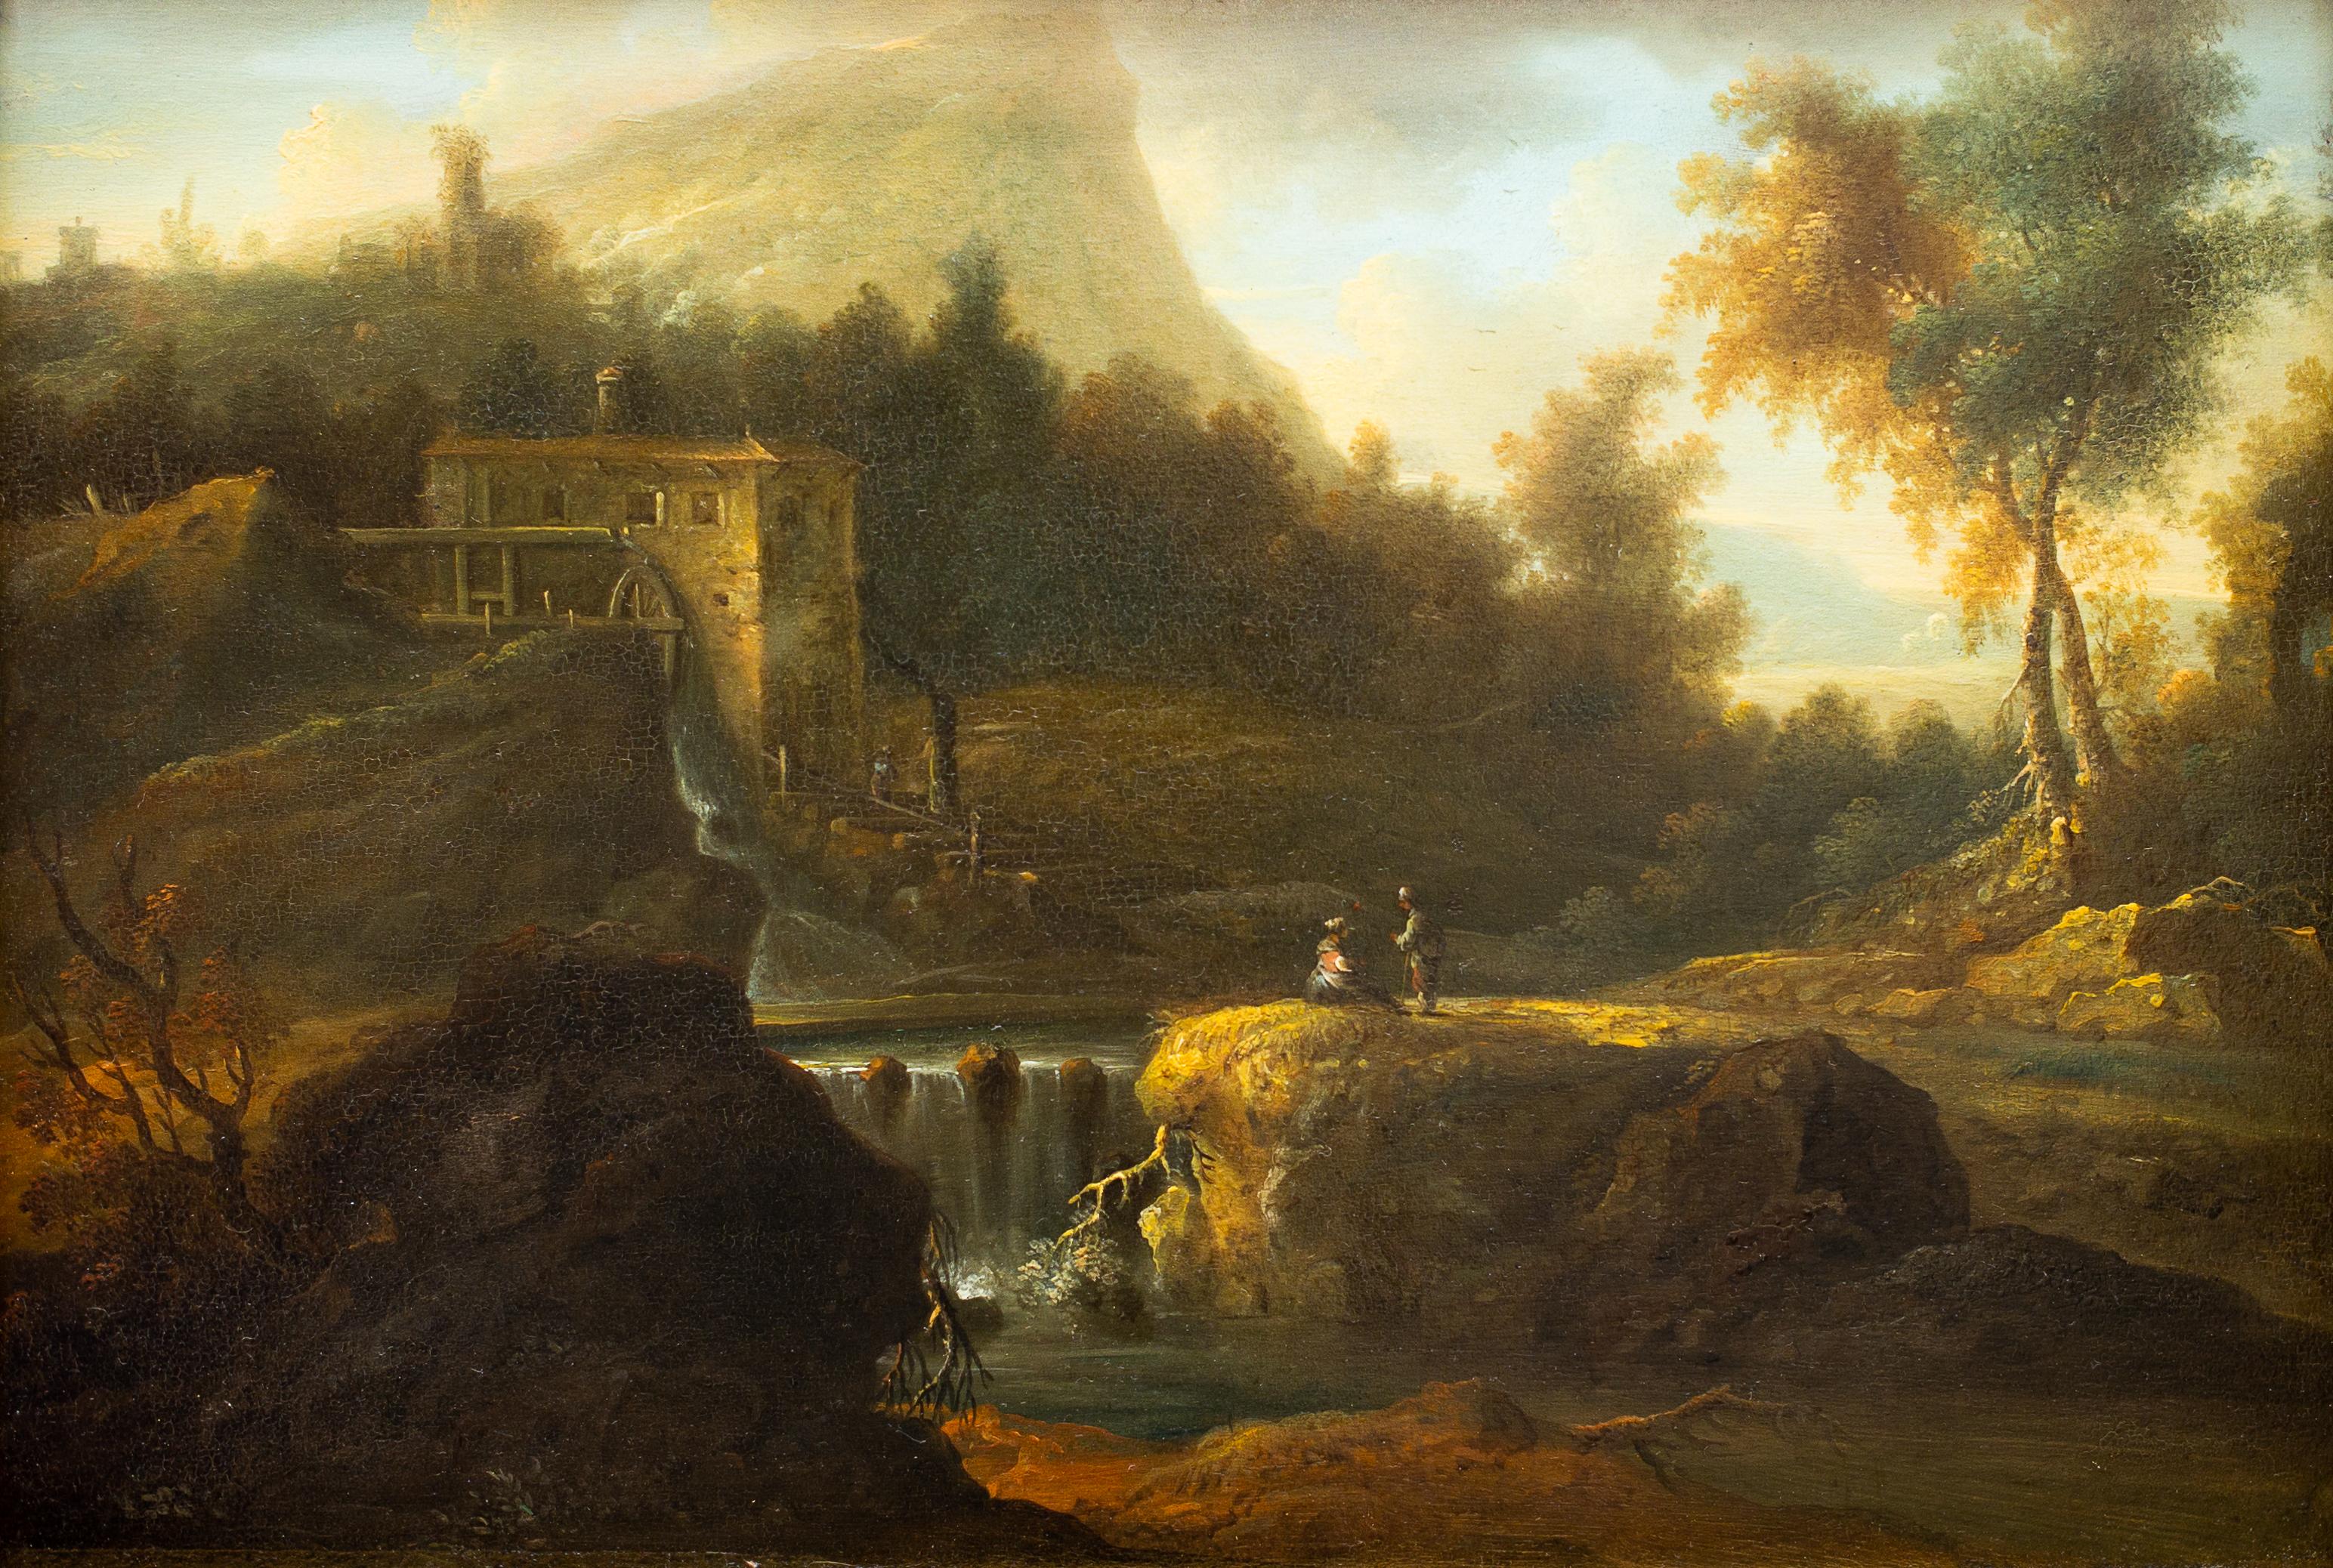 Italian Landscape With Figures at a Waterfall by a Follower of Jan van Huysum